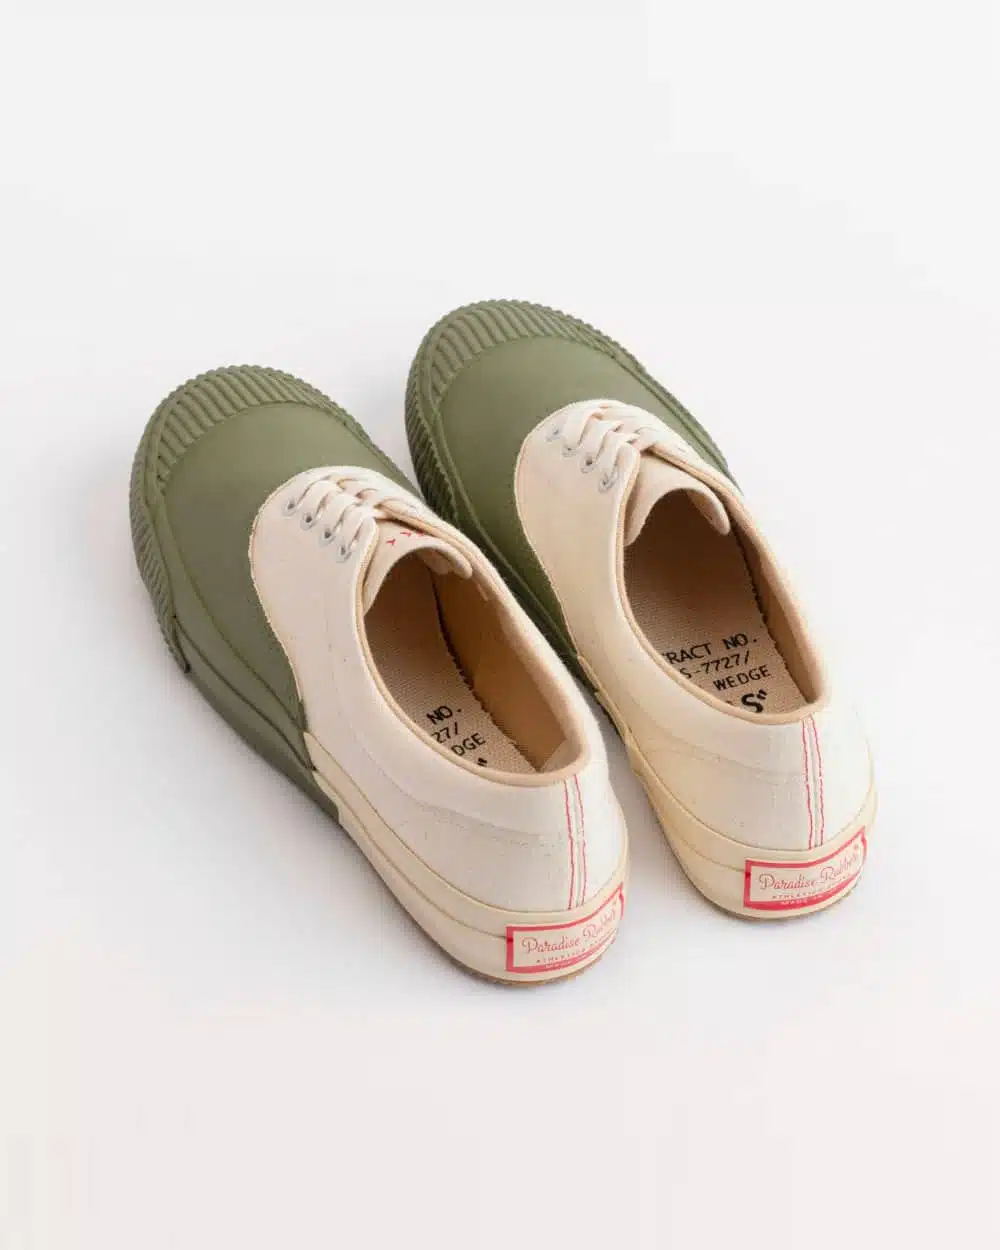 PRAS Shellcap Deck Sneakers Hand Painted - Olive/Off White